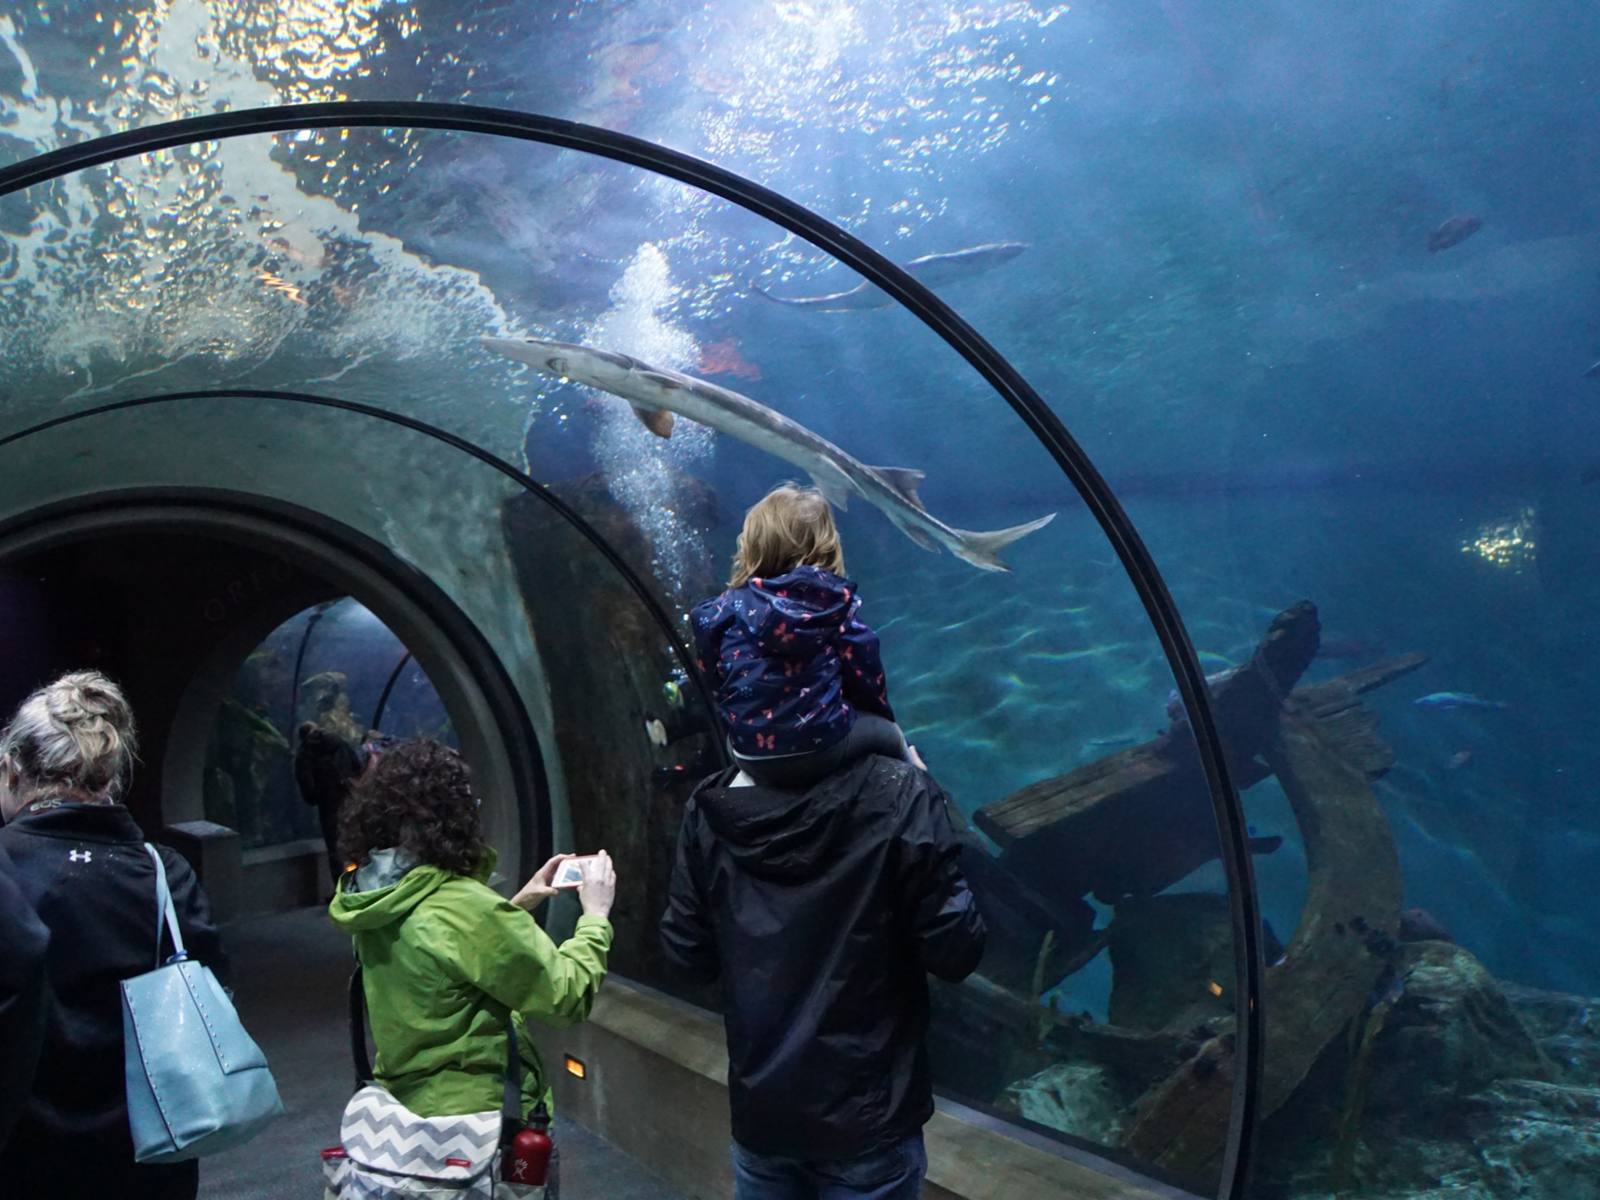 A family visiting the tunnel aquarium at the Newport Aquarium, one of the best aquariums in the US, where the father carries his toddler on his shoulder while the mother prepares to take a picture